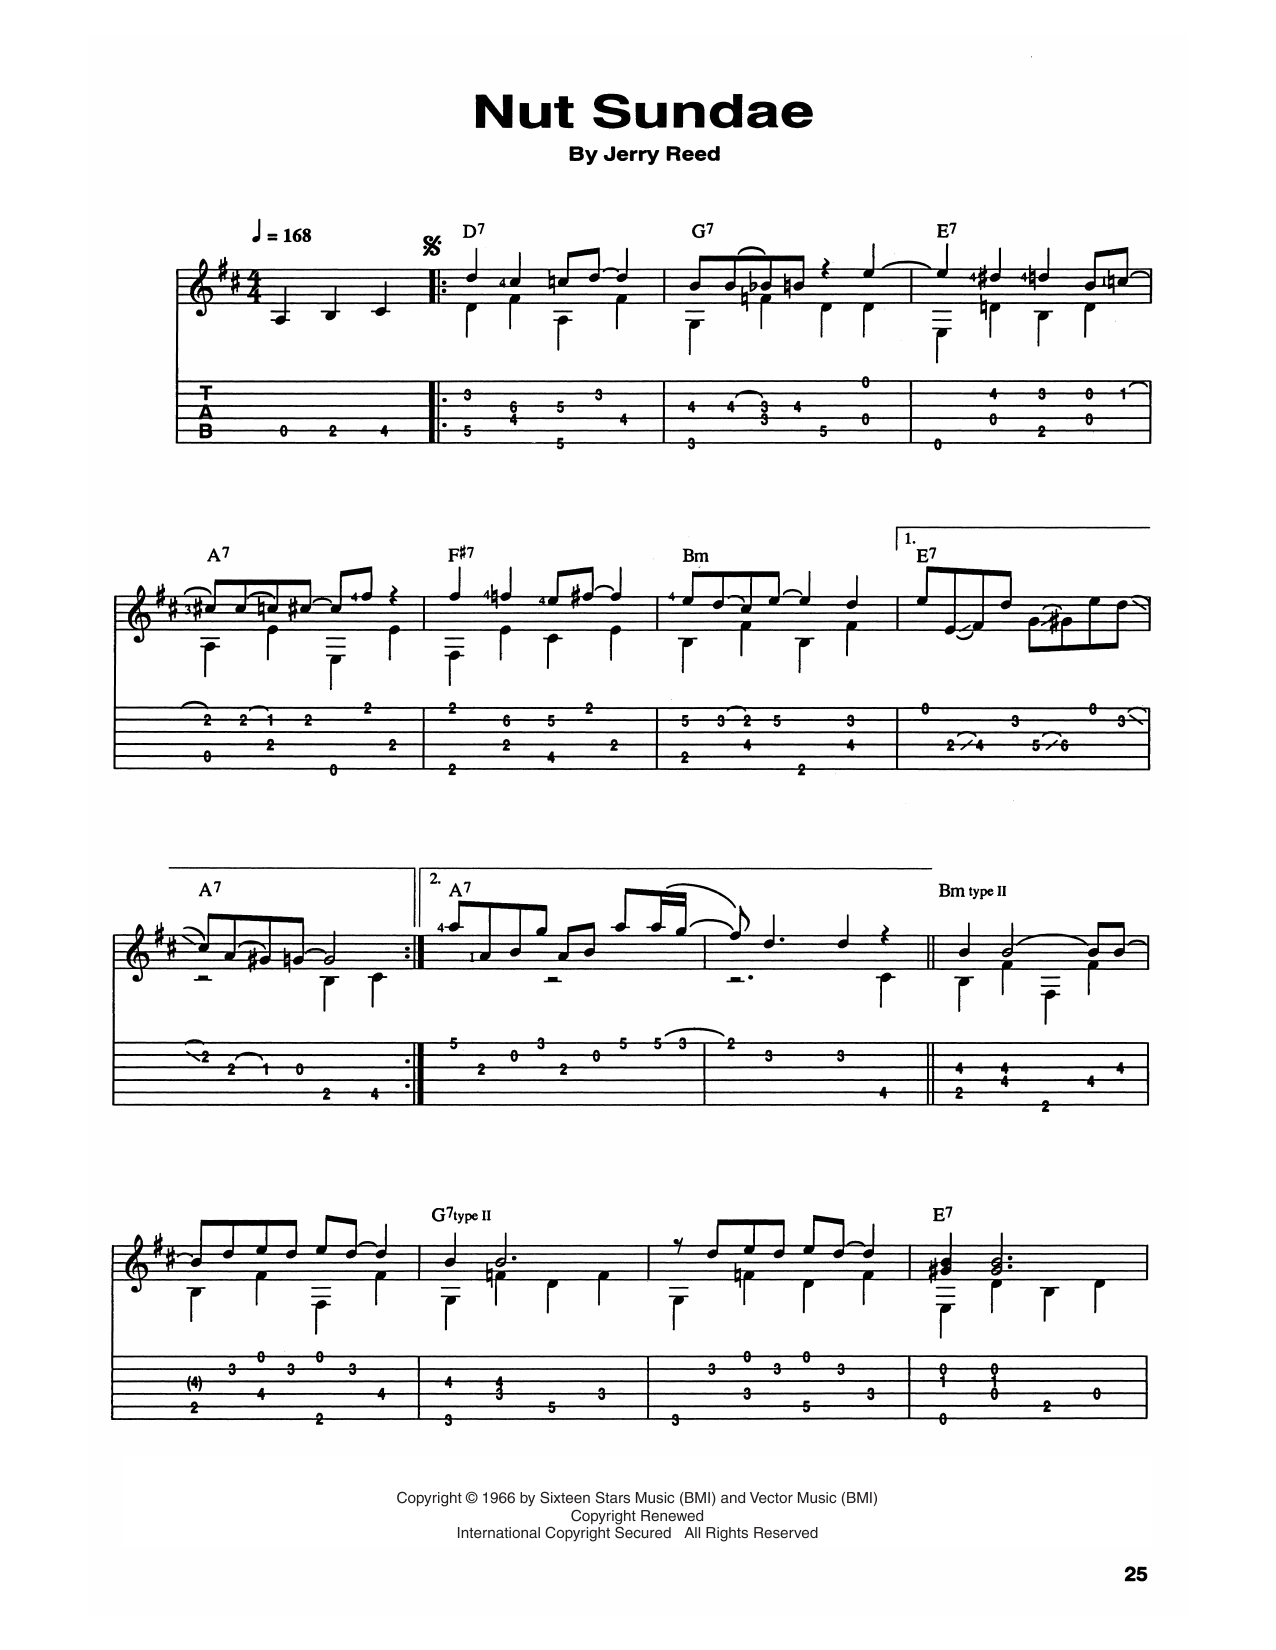 Download Chet Atkins and Jerry Reed Nut Sundae Sheet Music